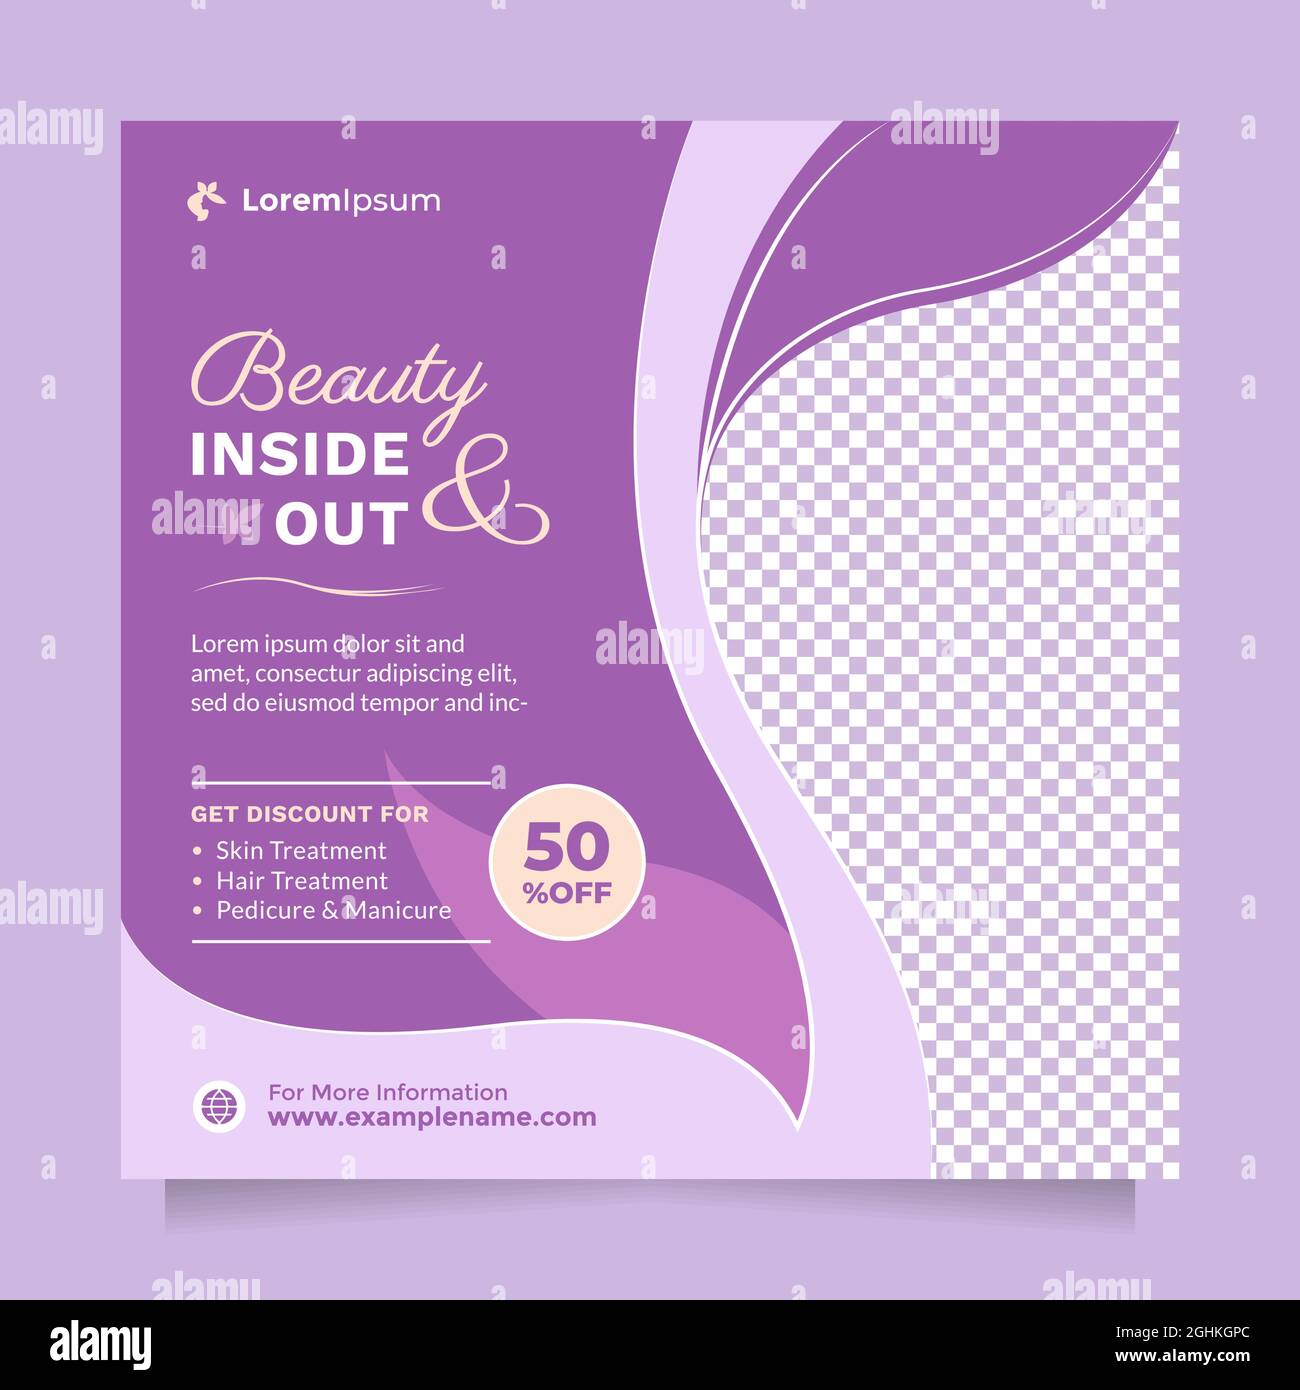 Beauty care service concept social media post and banner template. Modern promotion design of professional hair spa, skin treatment & cosmetic sale Stock Vector